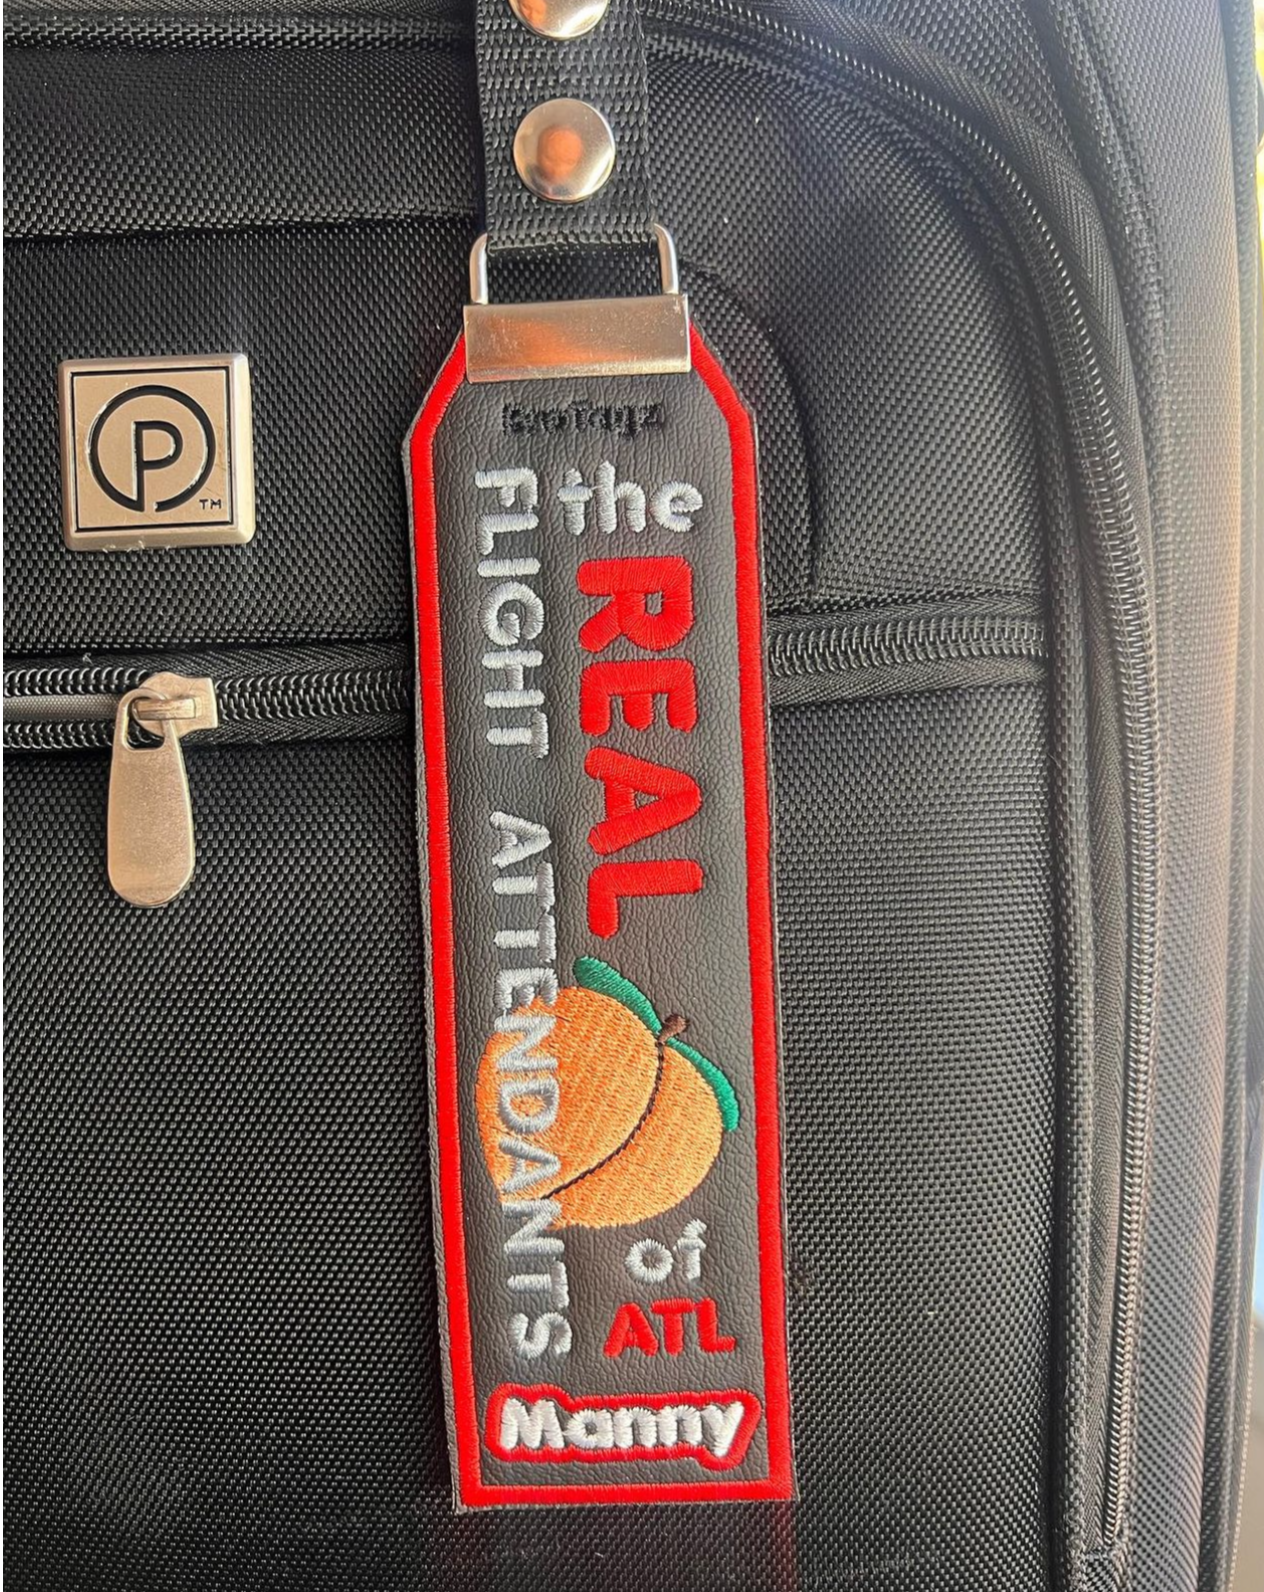 “The REAL Flight Attendants” (PEACH) Themed Bag Tag